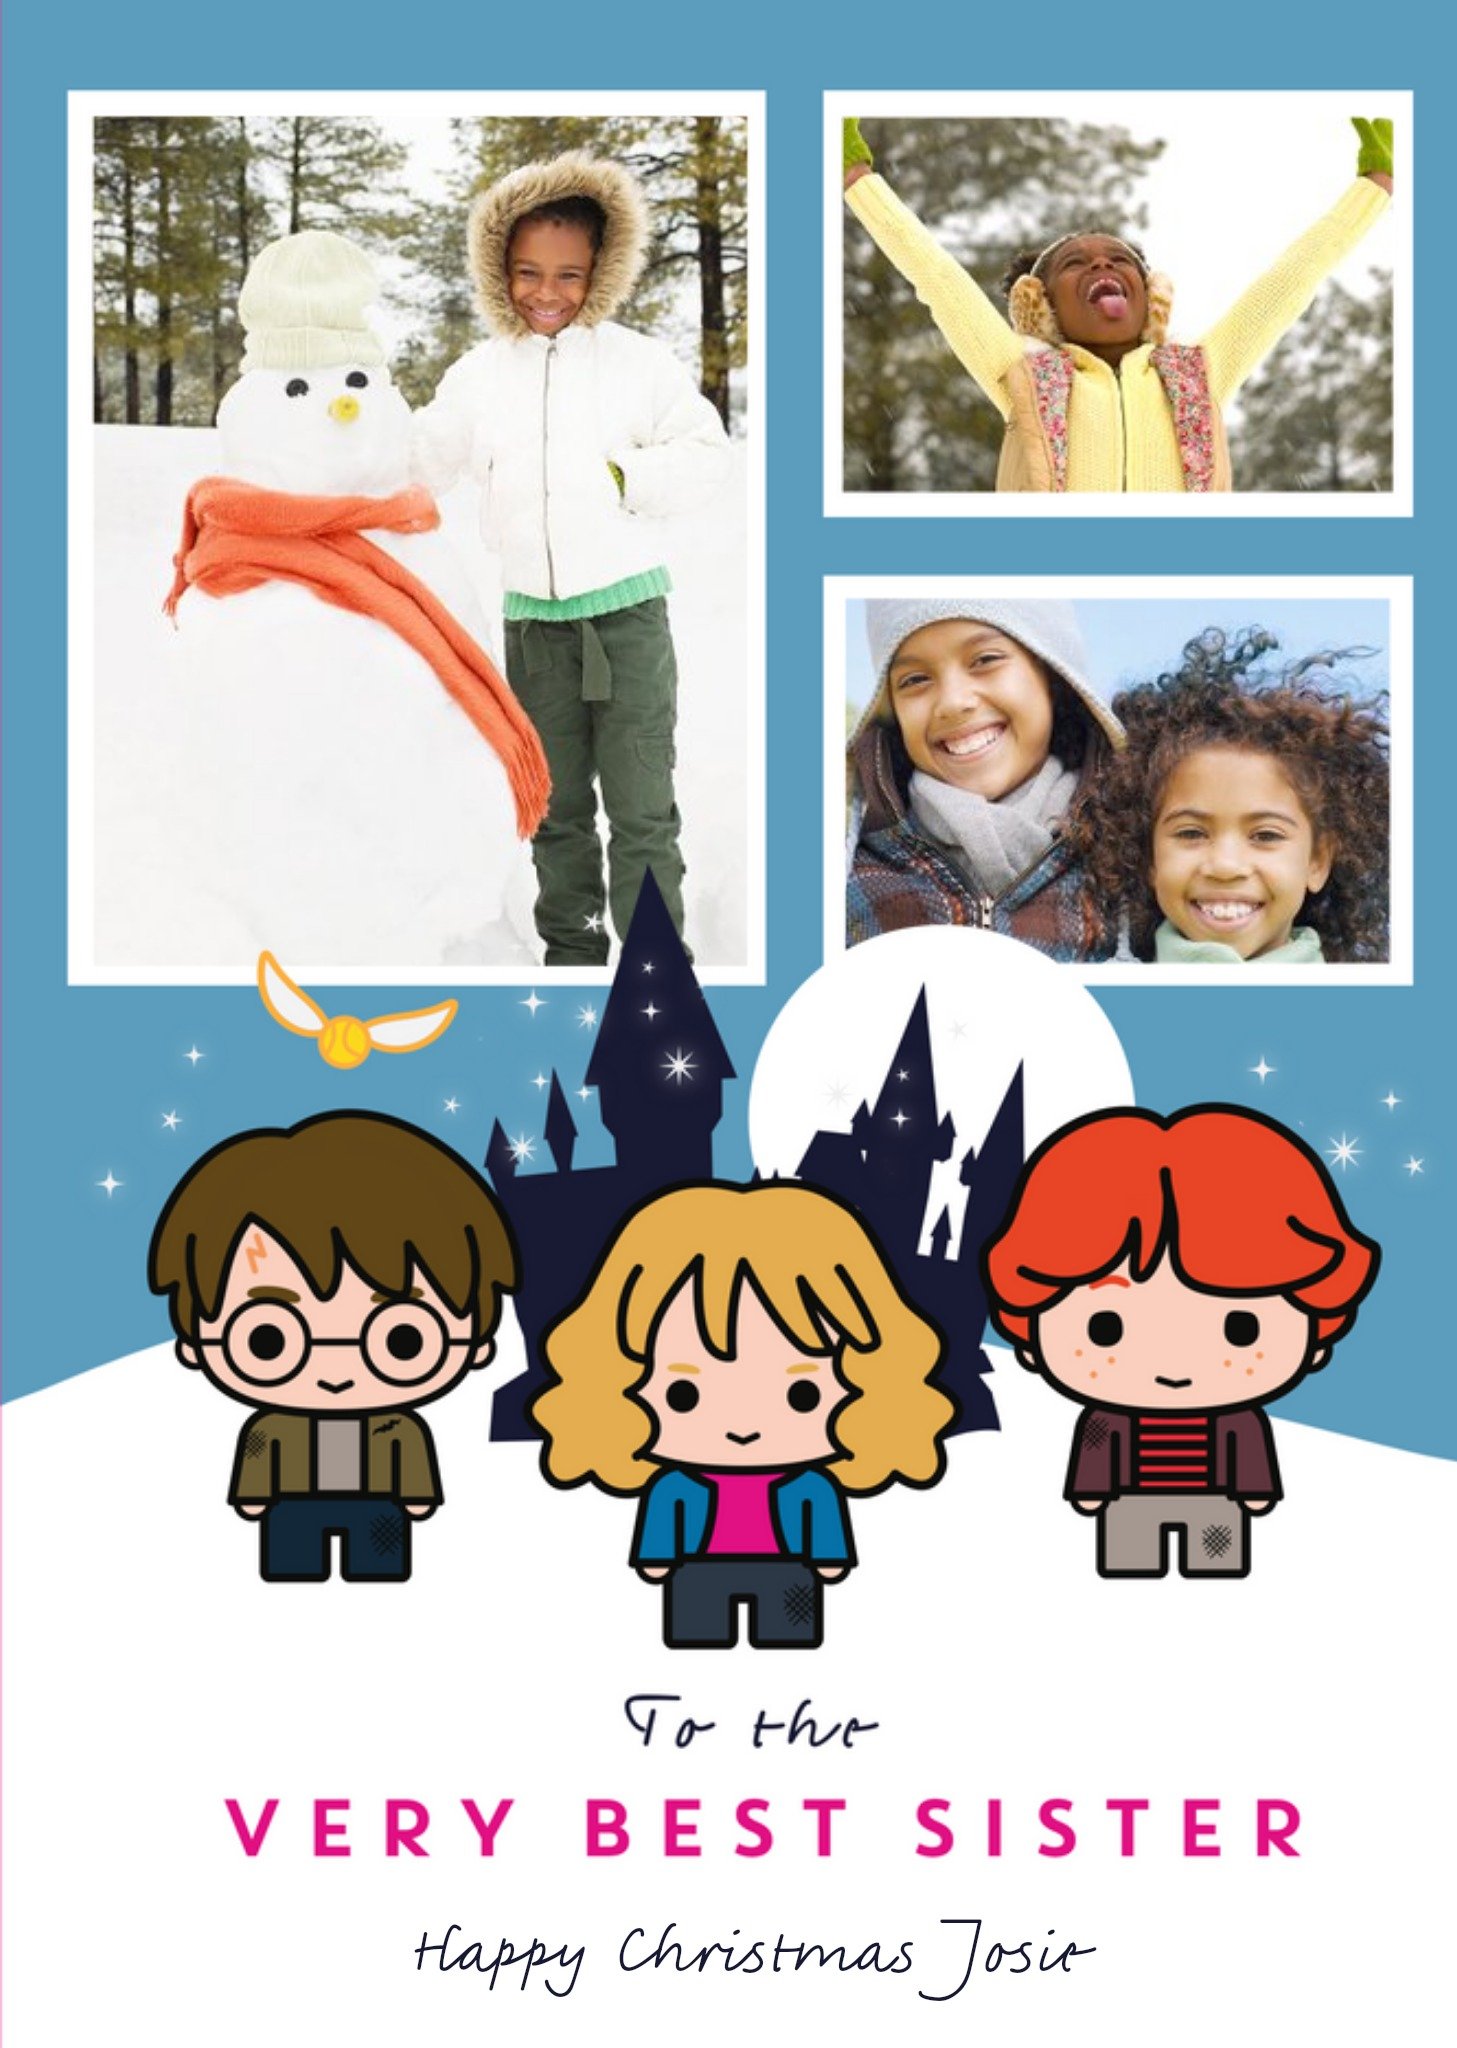 Harry Potter Cartoon To The Very Best Sister Photo Upload Christmas Card, Large